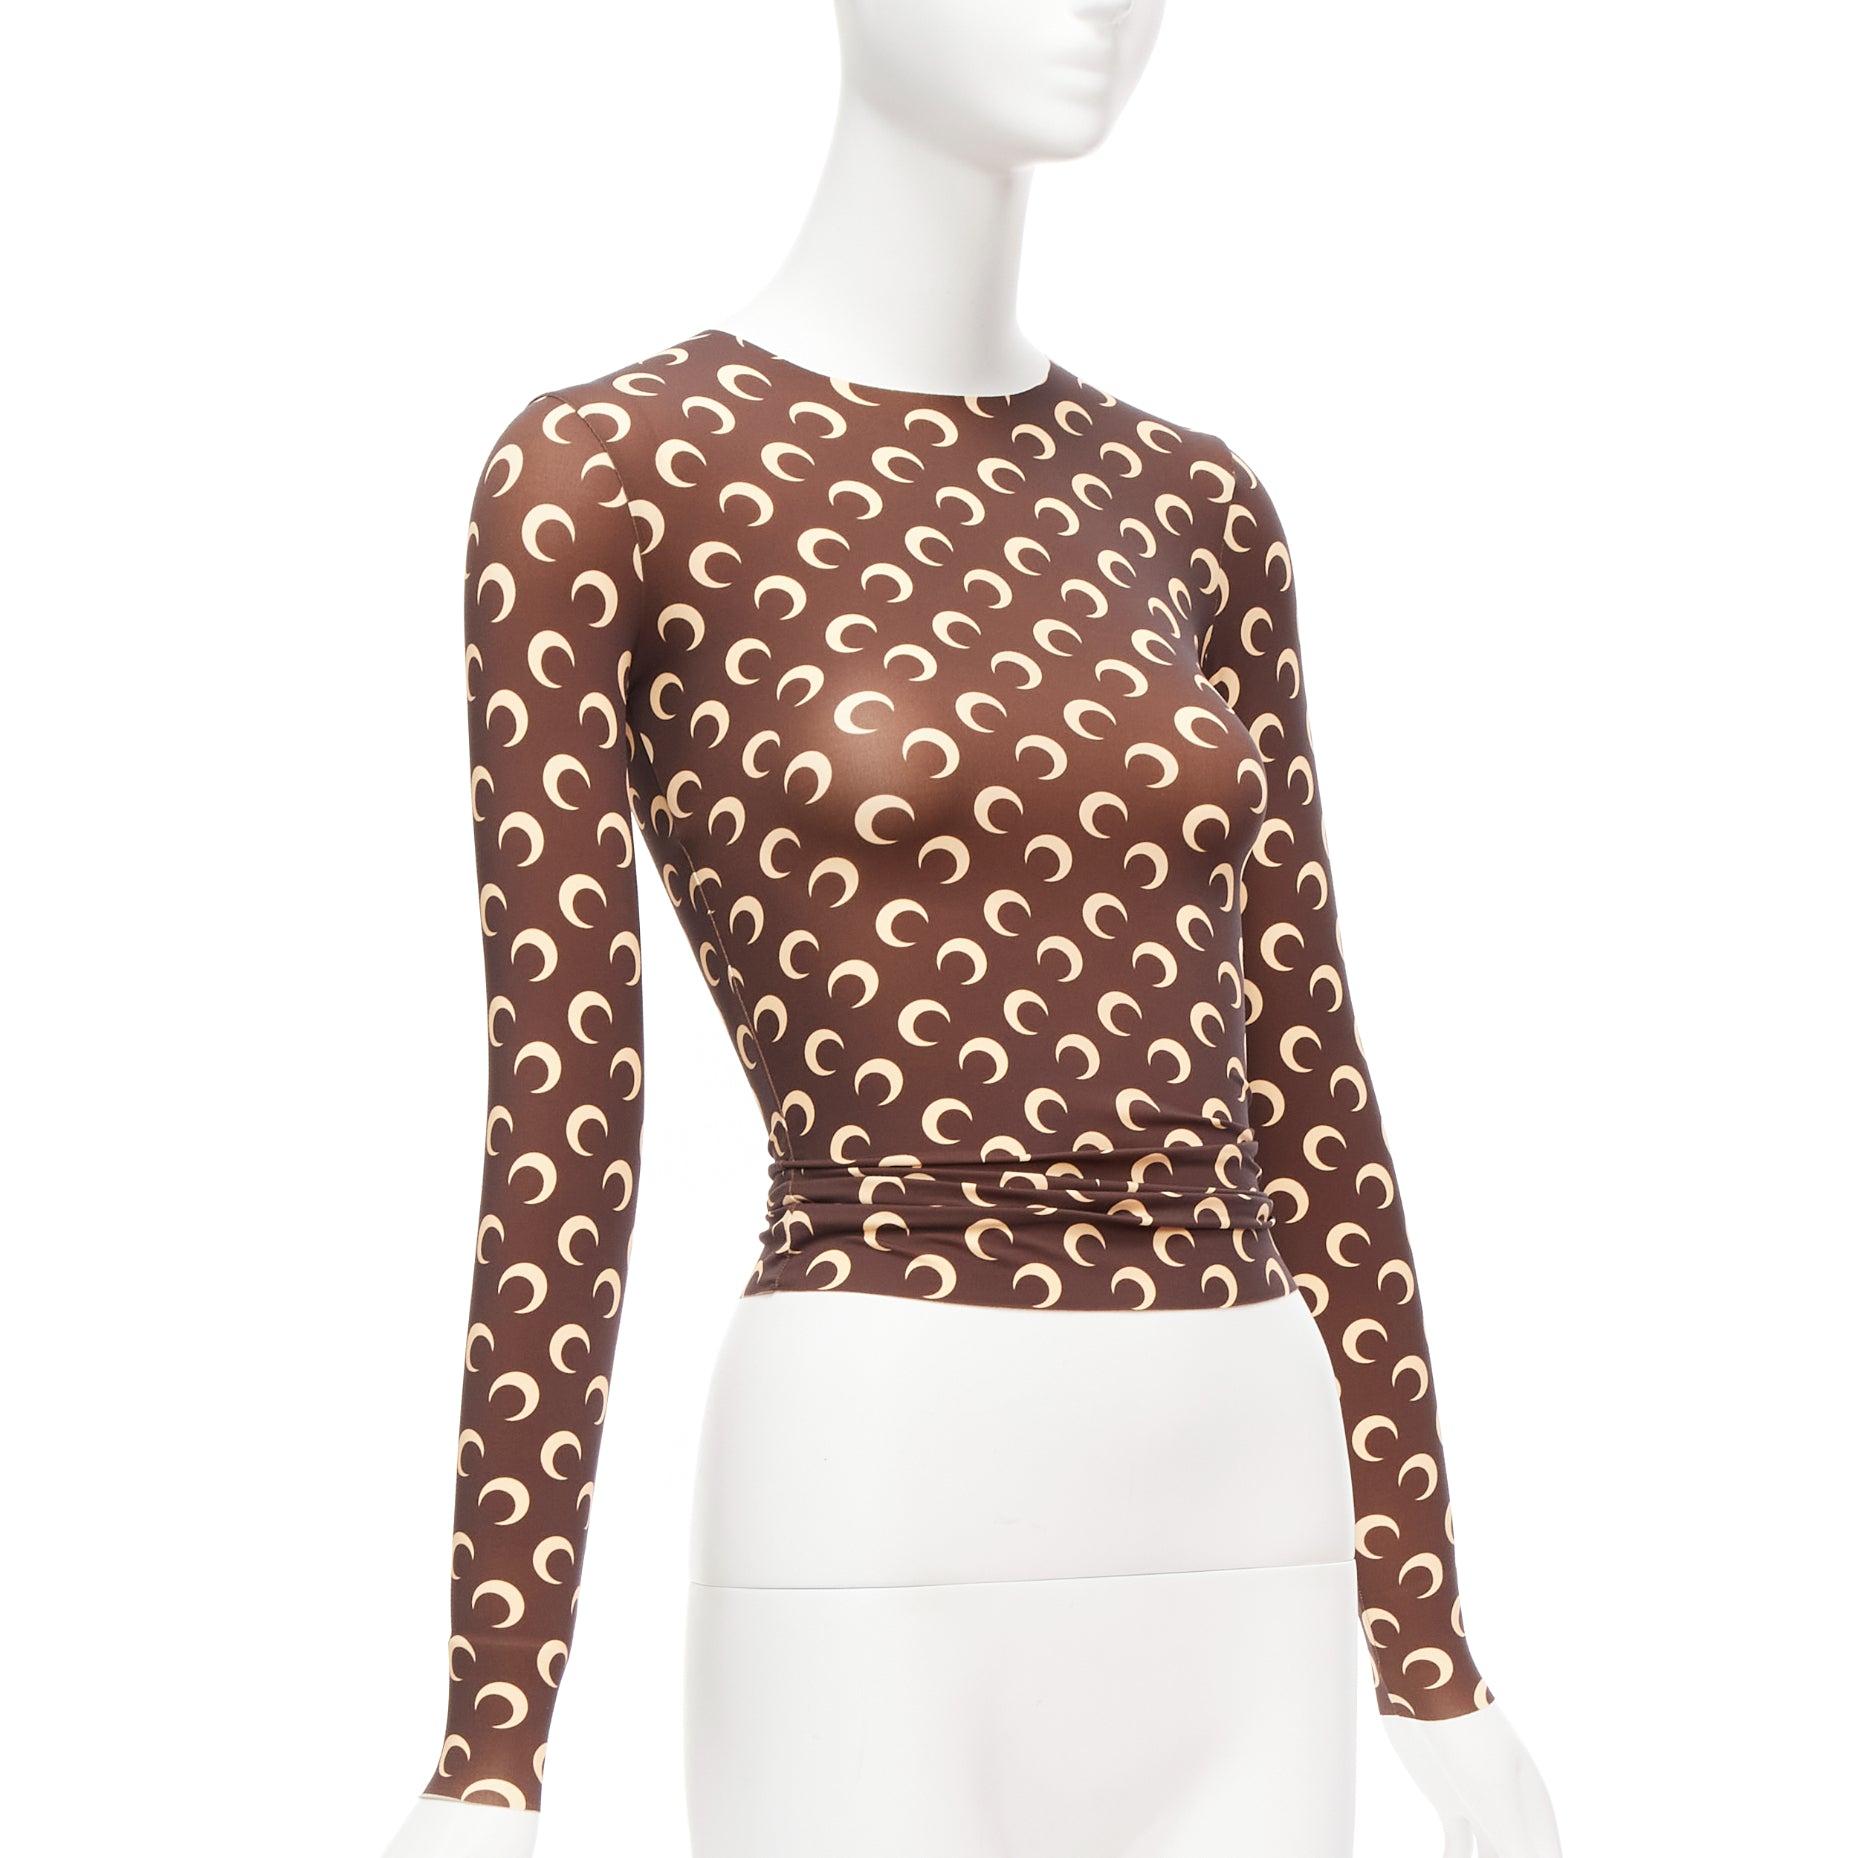 MARINE SERRIE brown Crescent Moon long sleeve second skin fitted top S
Reference: AAWC/A00663
Brand: Marine Serre
Collection: White Line
Material: Polyamide, Elastane
Color: Brown
Pattern: Solid
Extra Details: Skintight fitted top.
Made in: